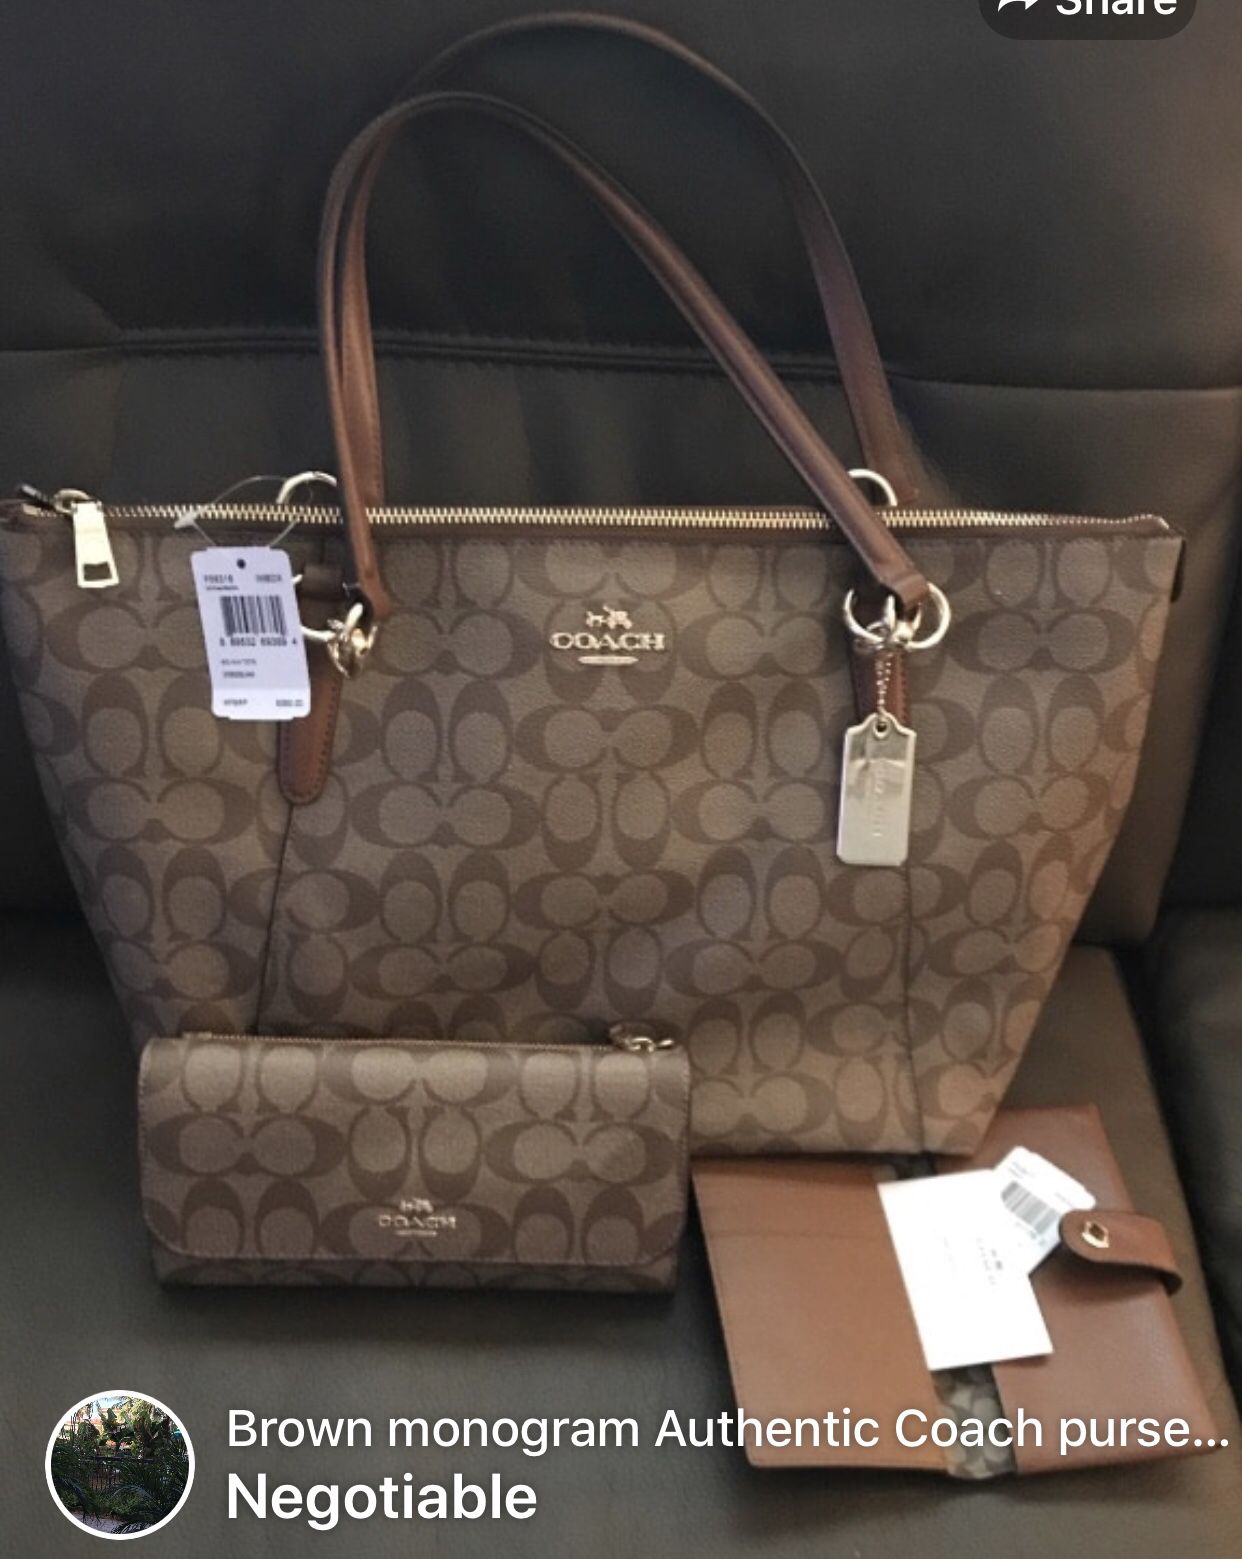 Selling brand new Authentic Coach purse and wallet set